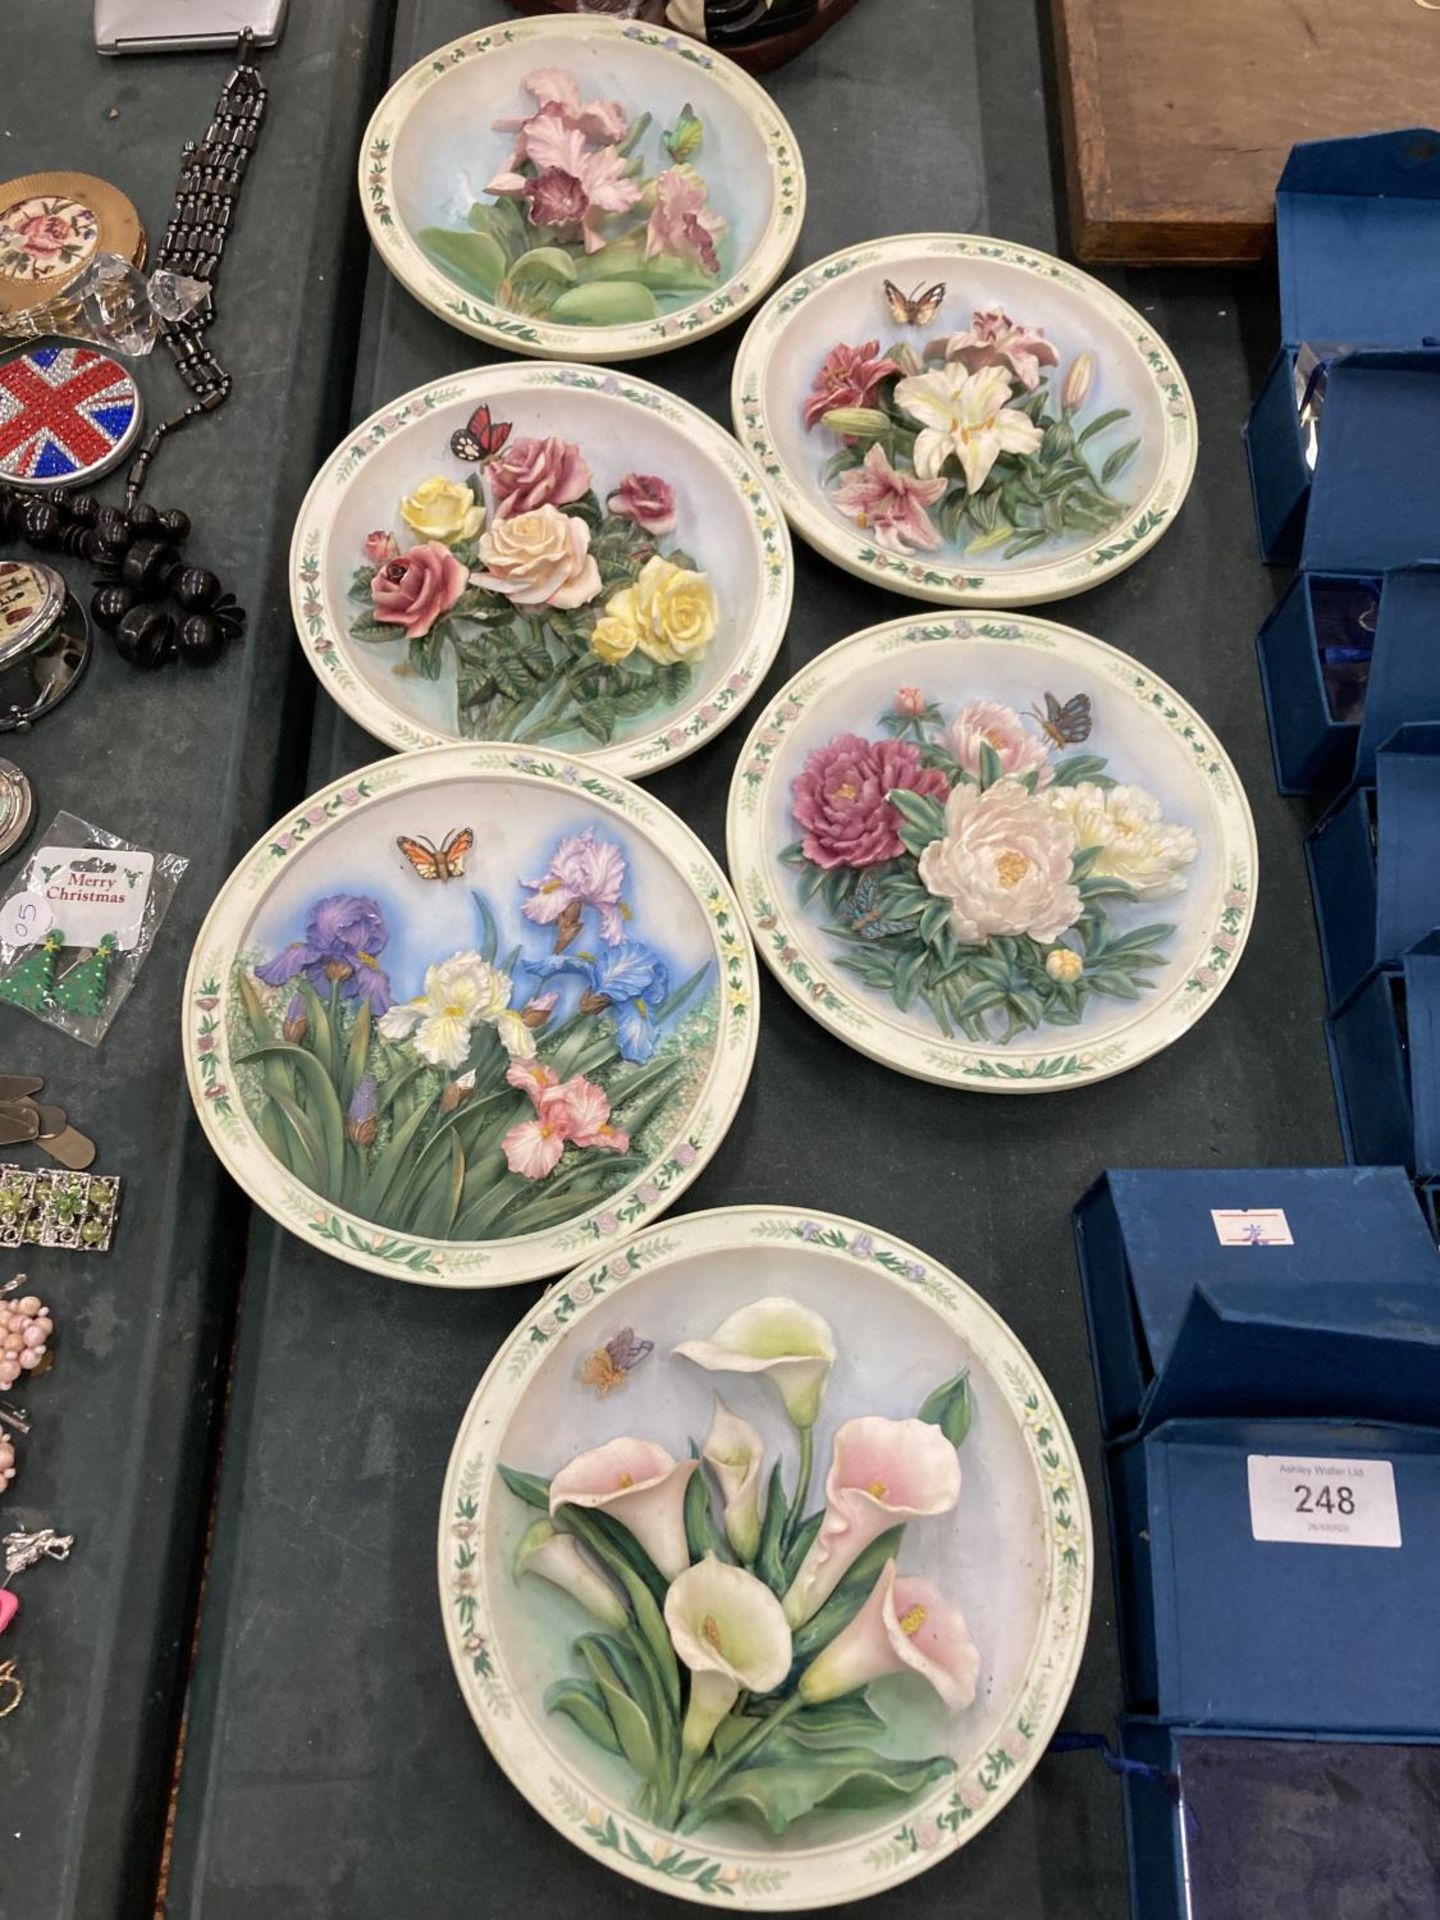 A COLLECTION OF LENA LIU 'BEAUTIFUL GARDENS' CABINET PLATES - 6 IN TOTAL, SOME A/F